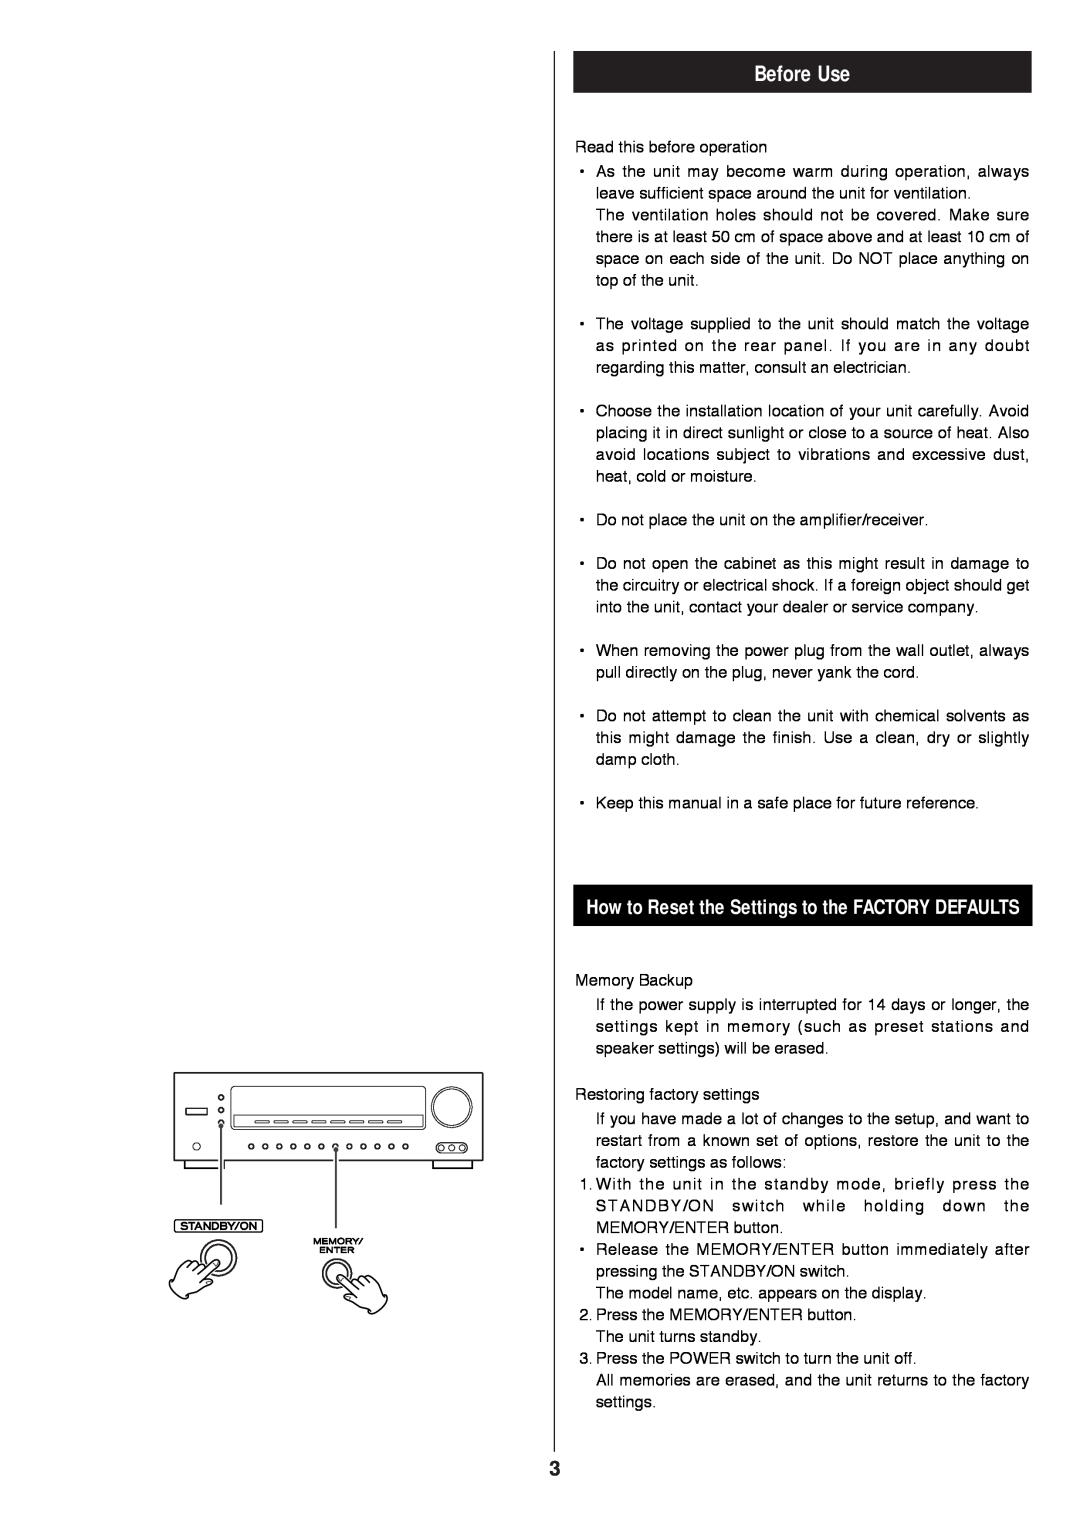 Proson rv2600 dts owner manual Before Use, How to Reset the Settings to the FACTORY DEFAULTS 